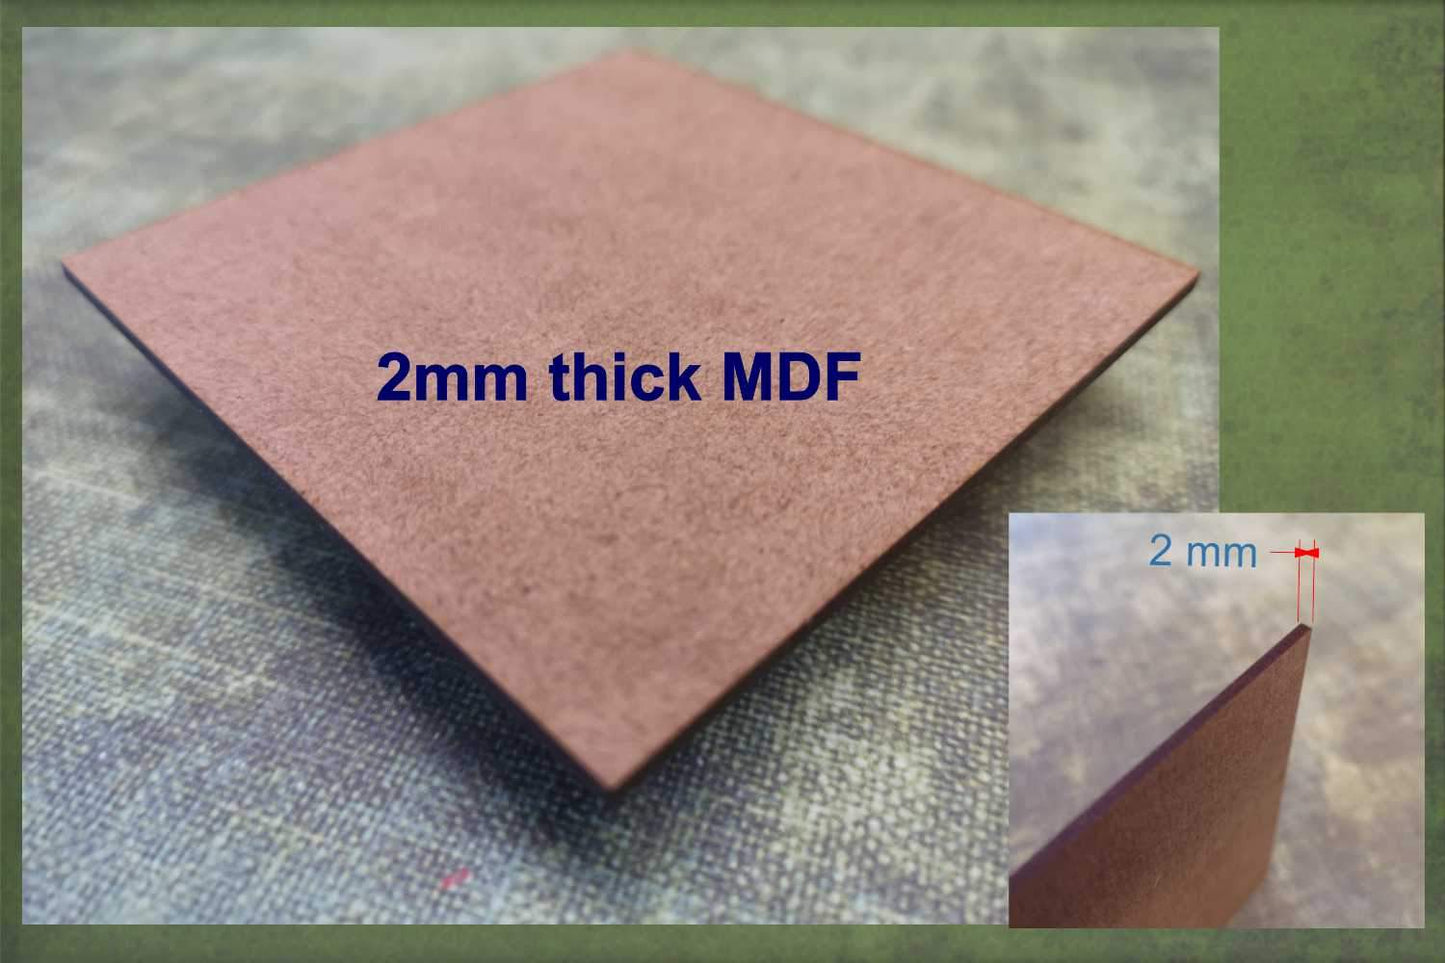 2mm thick MDF used to make the 4x4 cut-outs ready for crafting